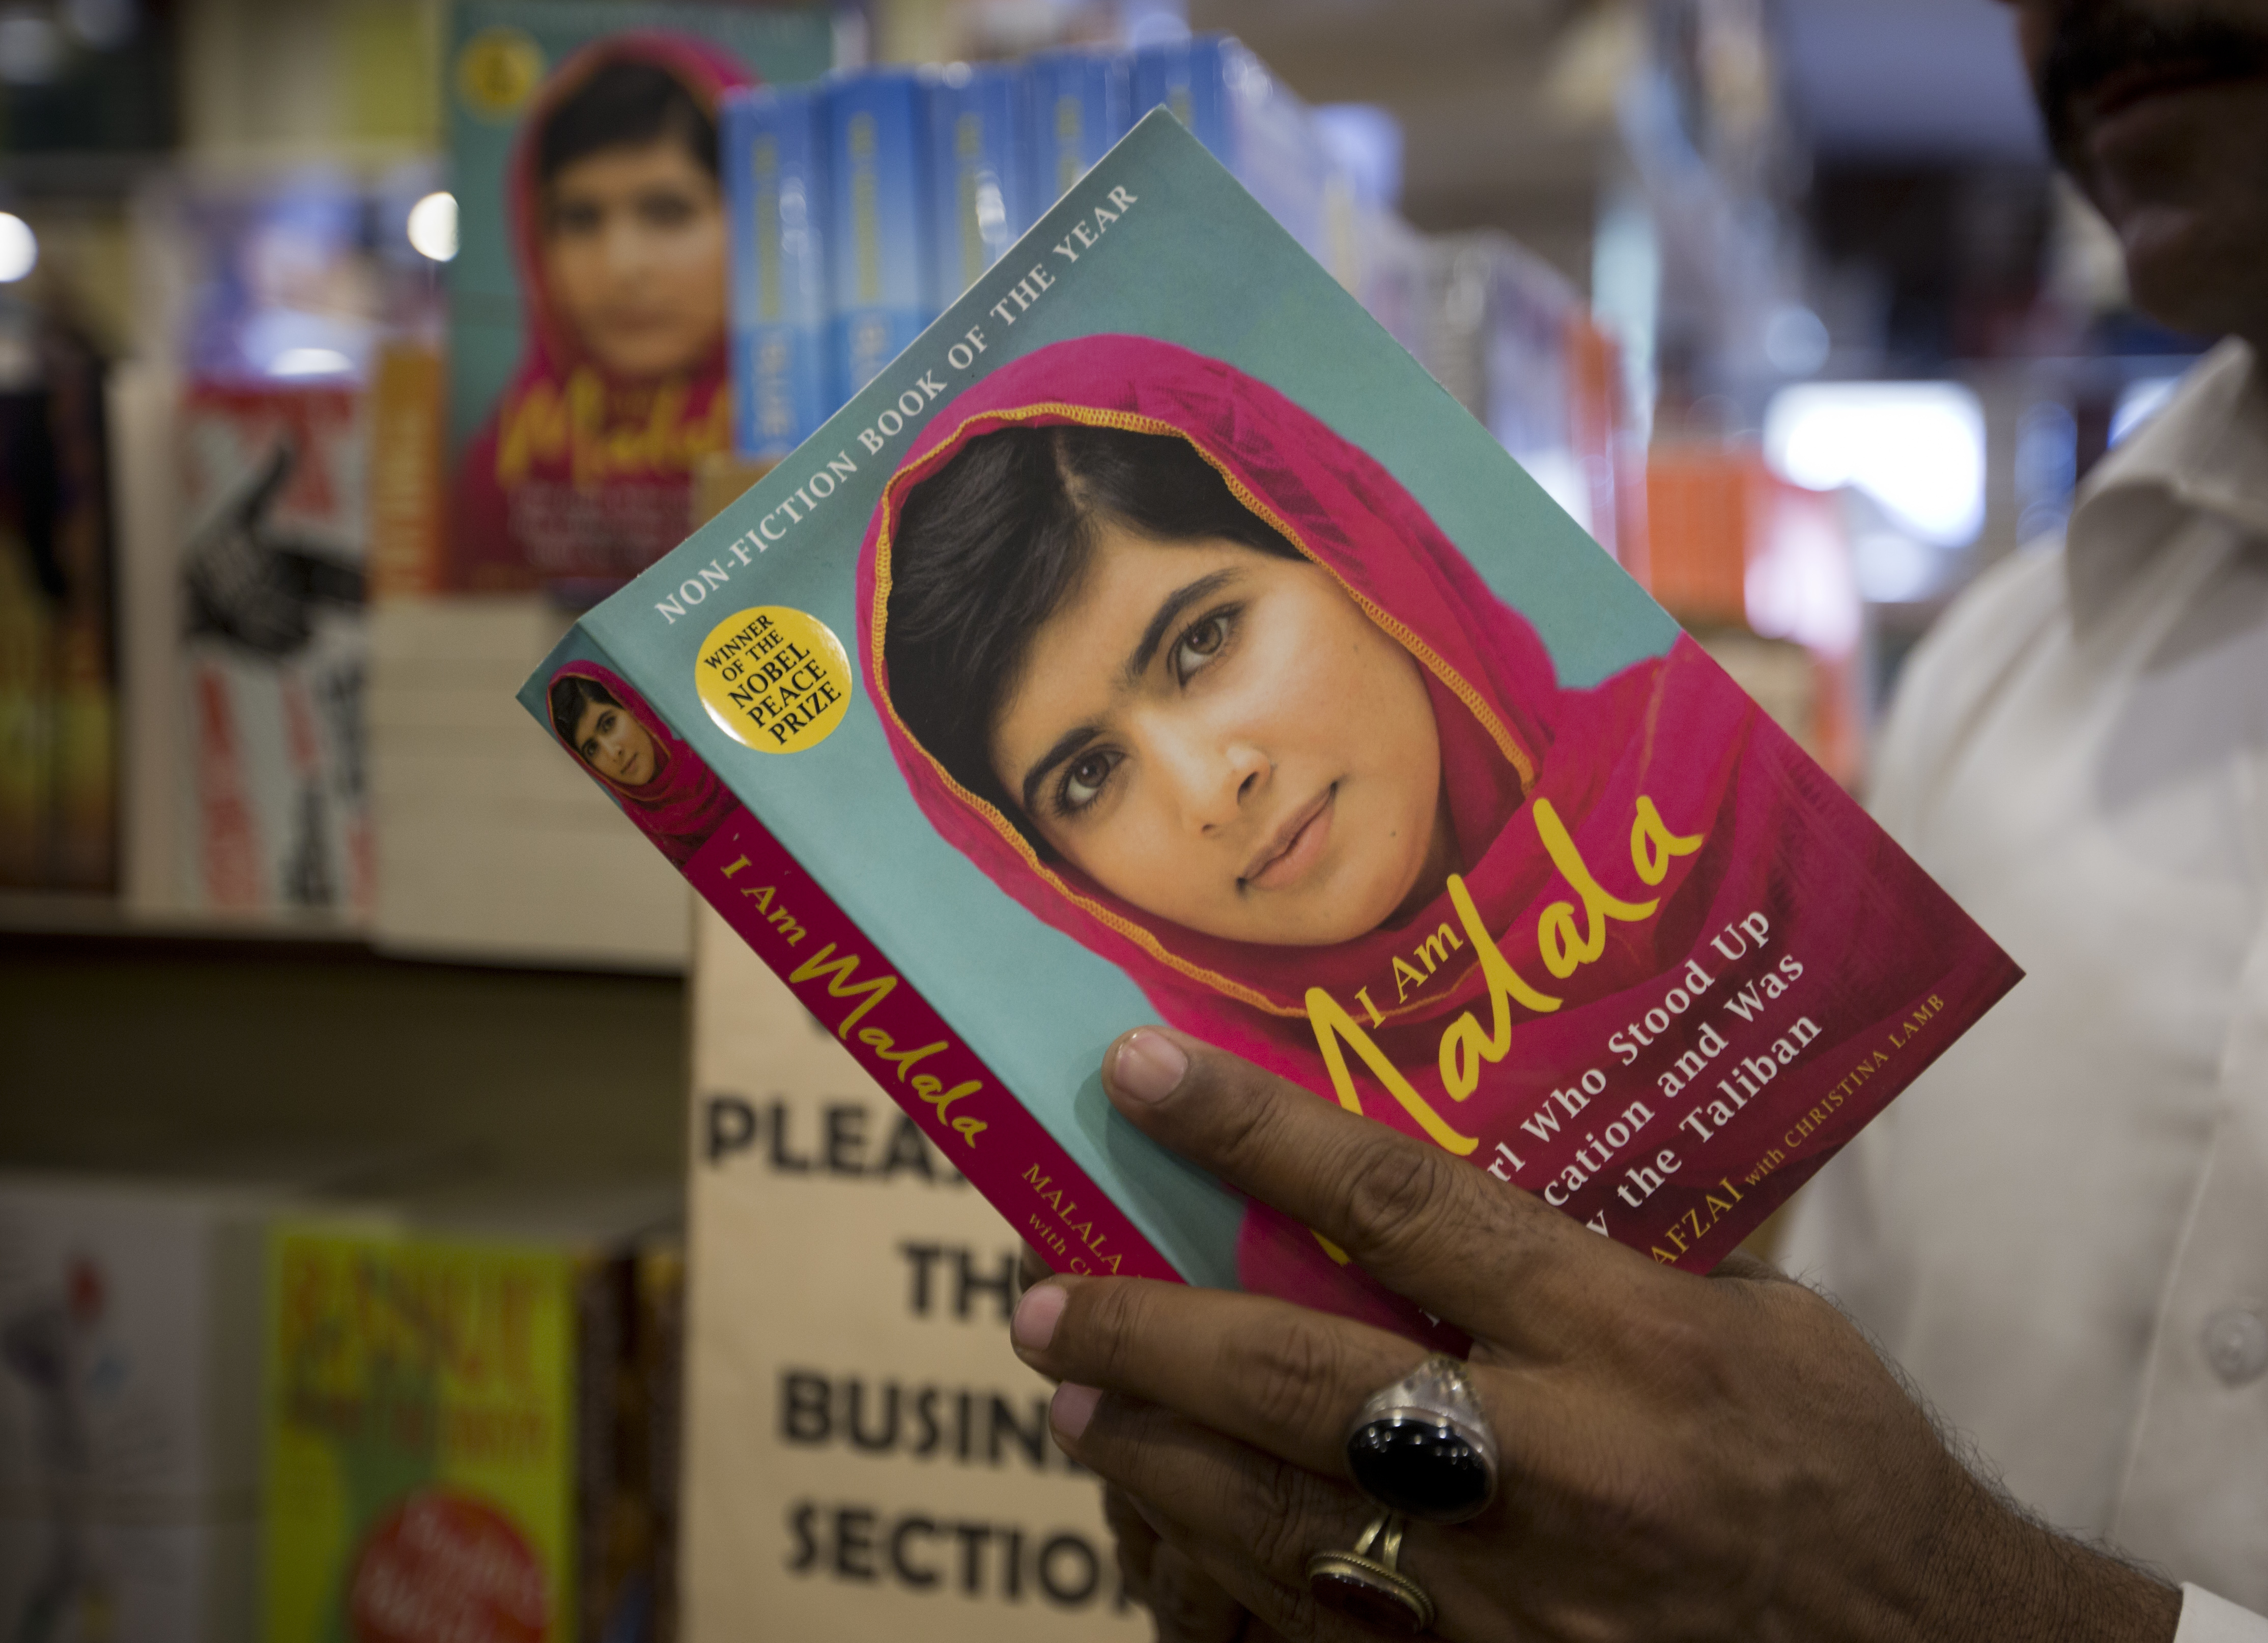 A Pakistani customer looks at a book of Nobel Peace Prize winner Malala Yousafzai at a book store in Islamabad, Pakistan, Friday, March 30, 2018. A Pakistani women's activist said Friday that Yousafzai, who has returned to Pakistan's capital Islamabad for the first time since a Taliban militant shot her in 2012, was hoping to visit her Swat Valley hometown but that the trip depended on security clearances from the government. (AP Photo/B.K. Bangash)